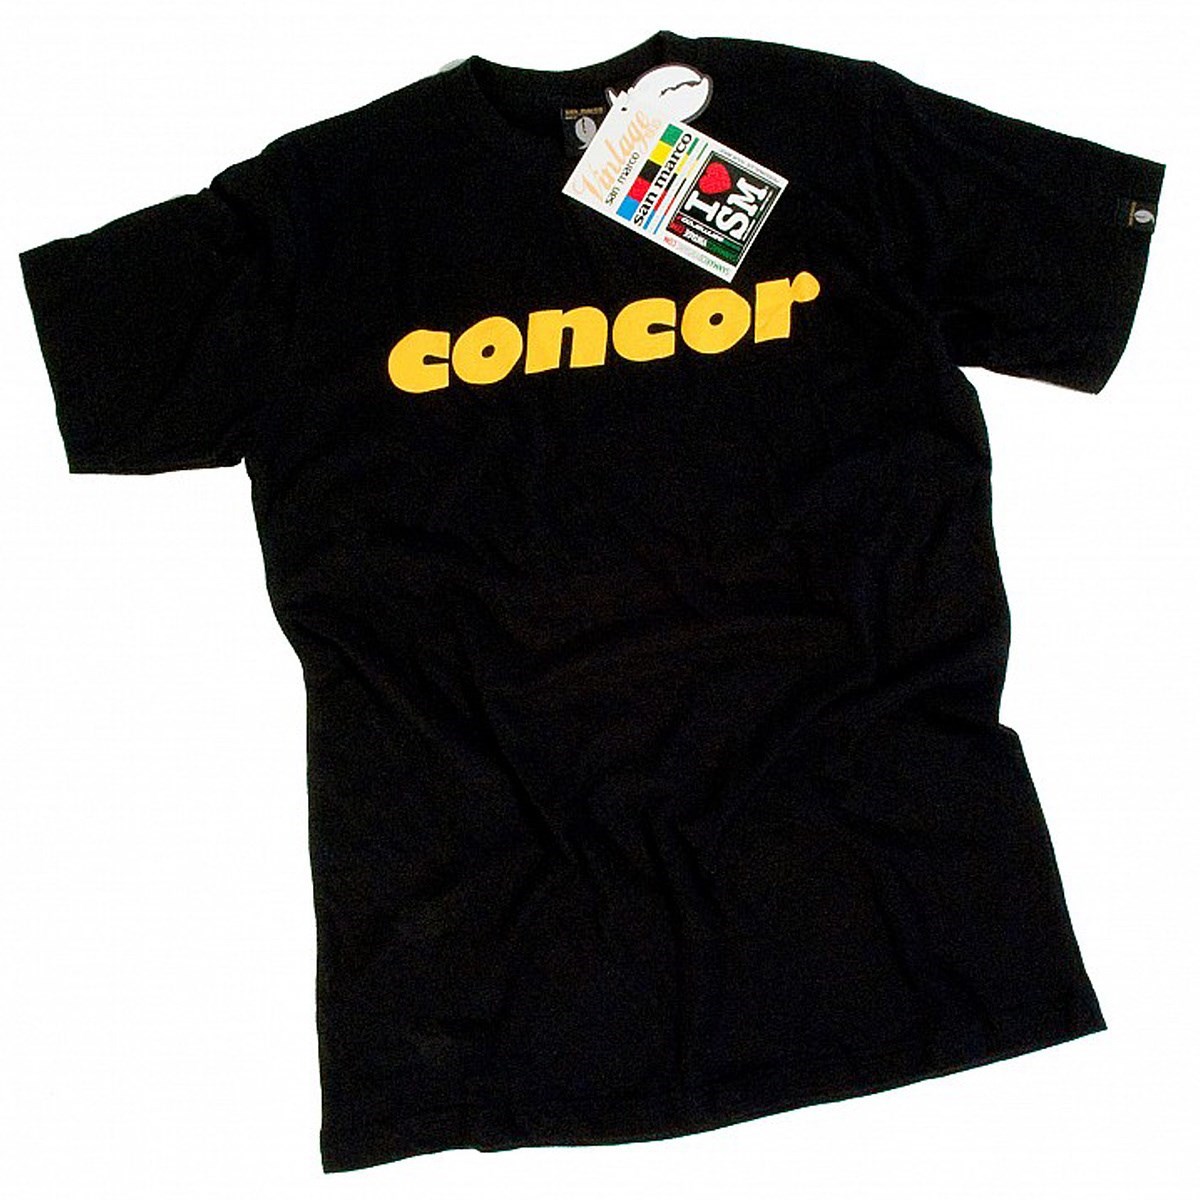 Selle San Marco Concor T-Shirt product image